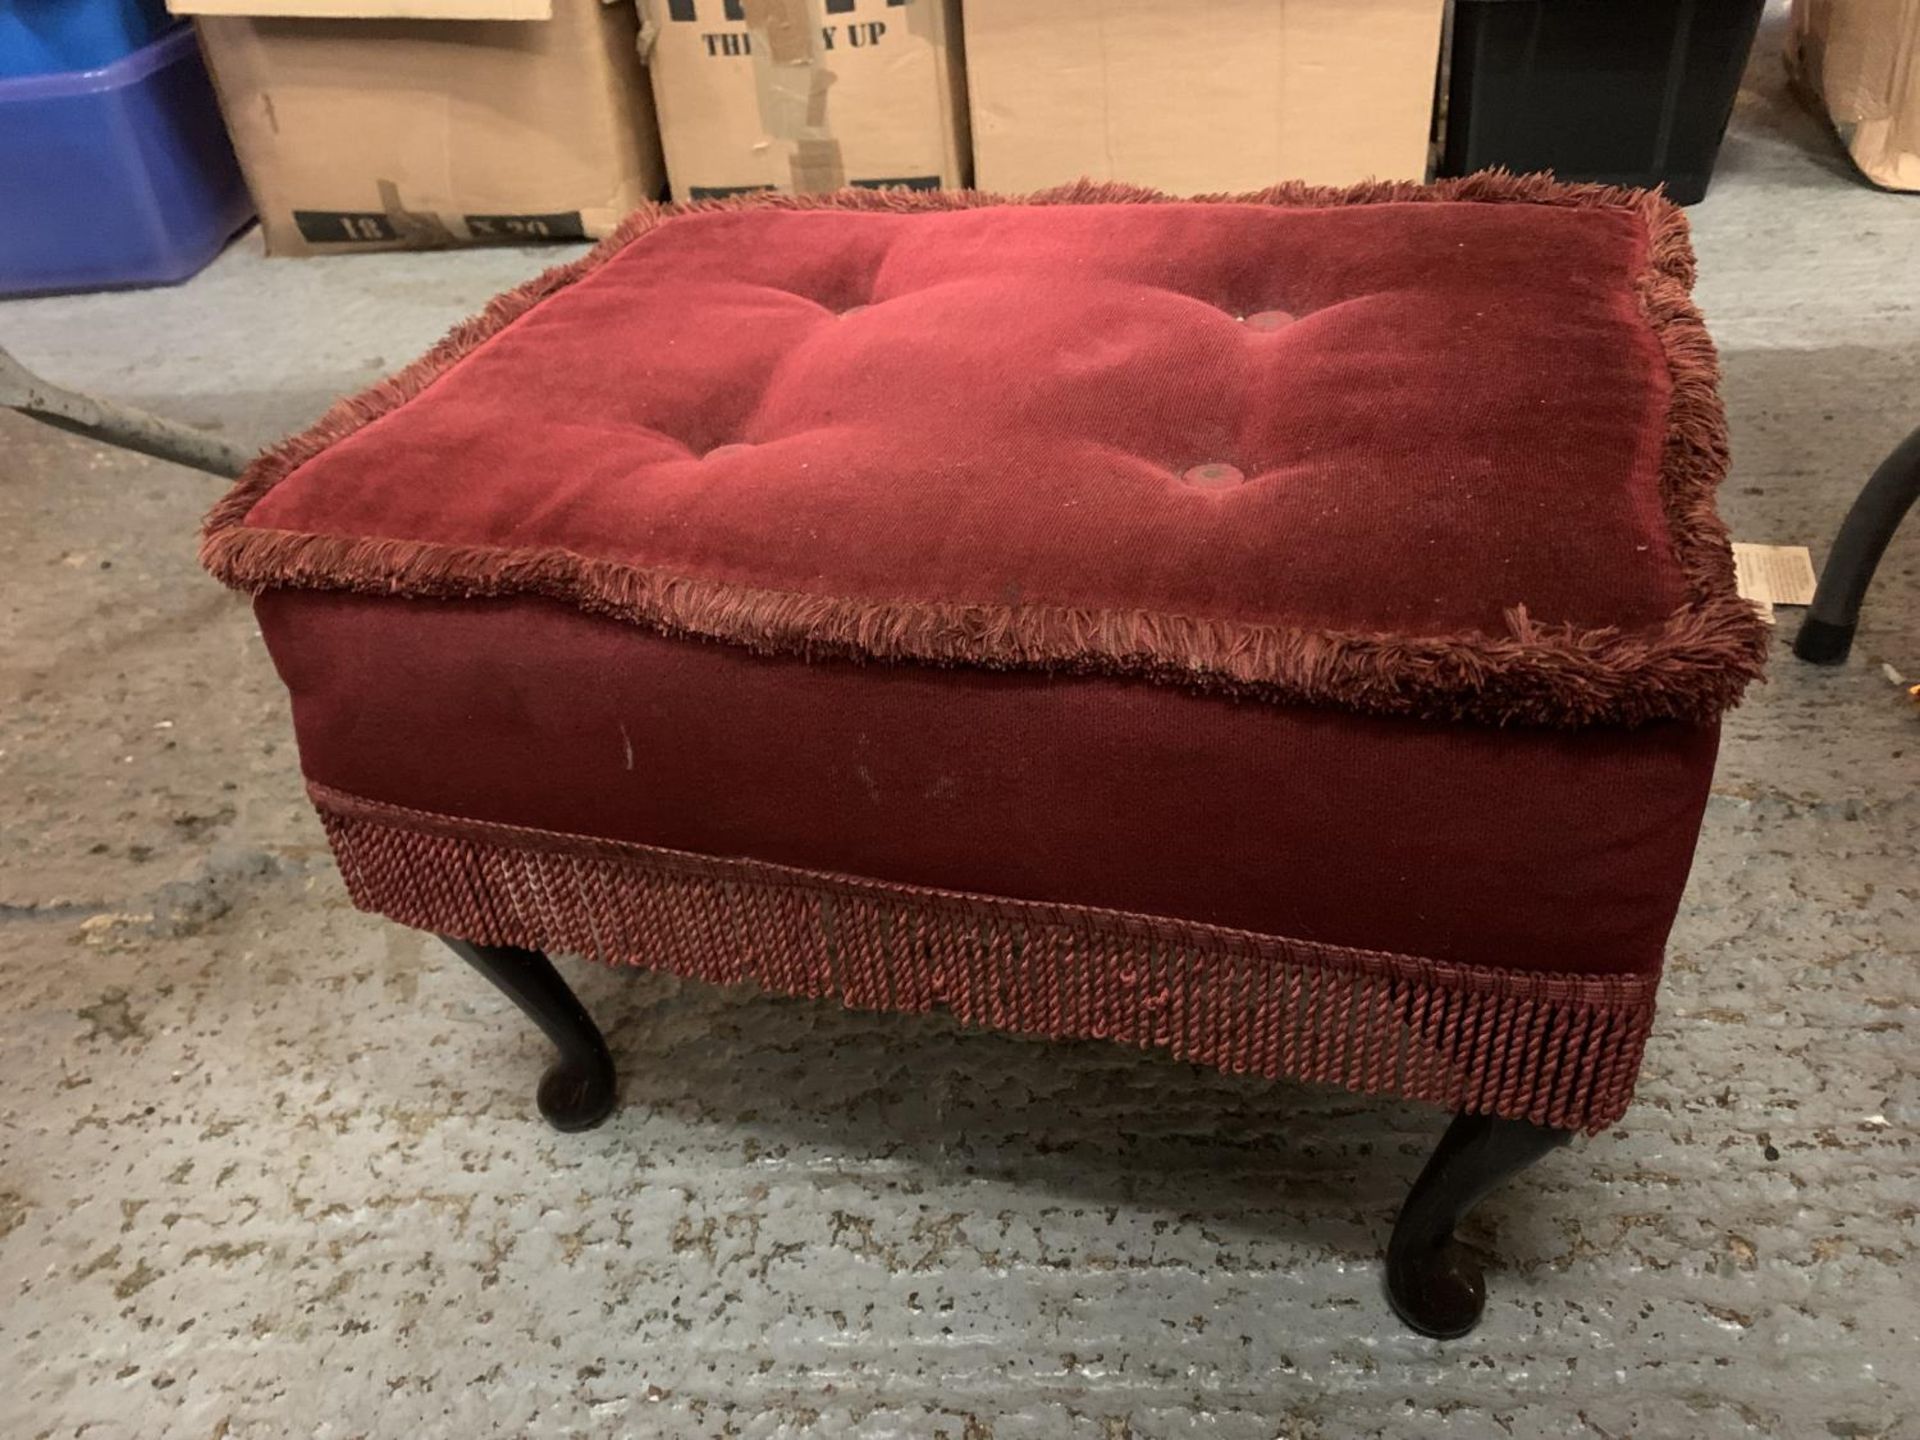 A VINTAGE FOOTSTOOL WITH RED VELVET UPHOLSTERY